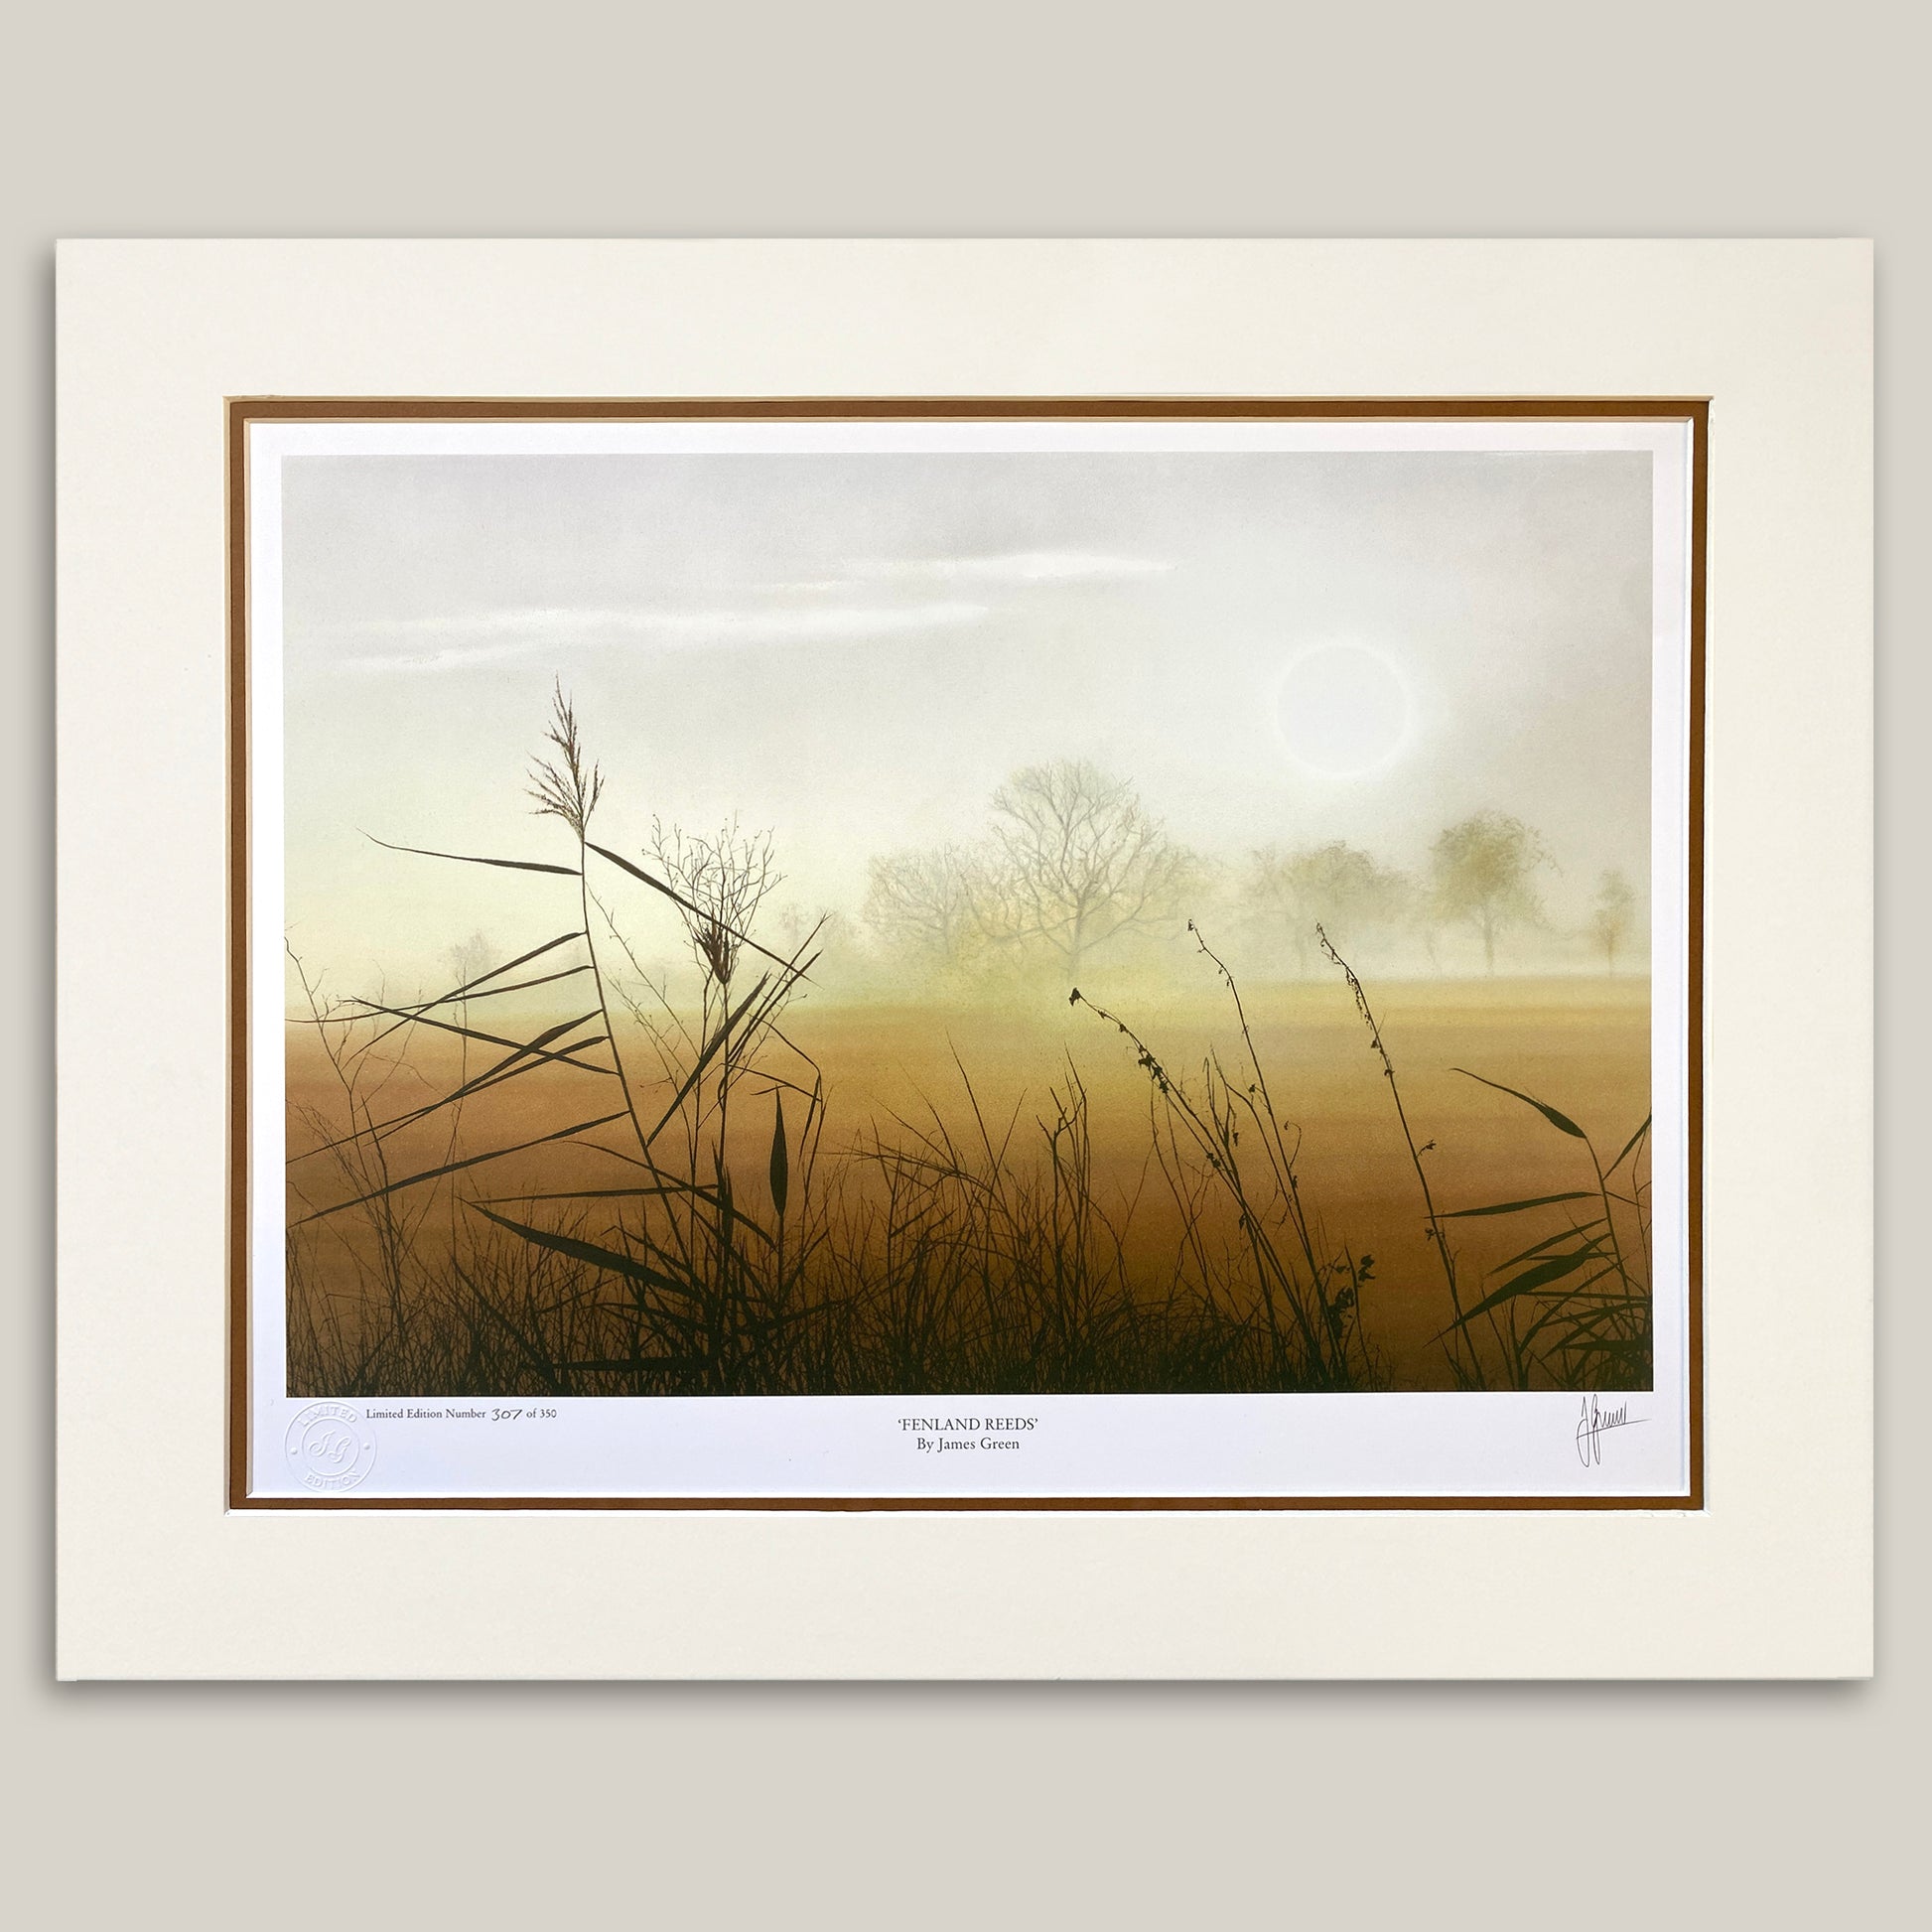 misty Fenland landscape painting with reeds in the foreground and sun setting in the background